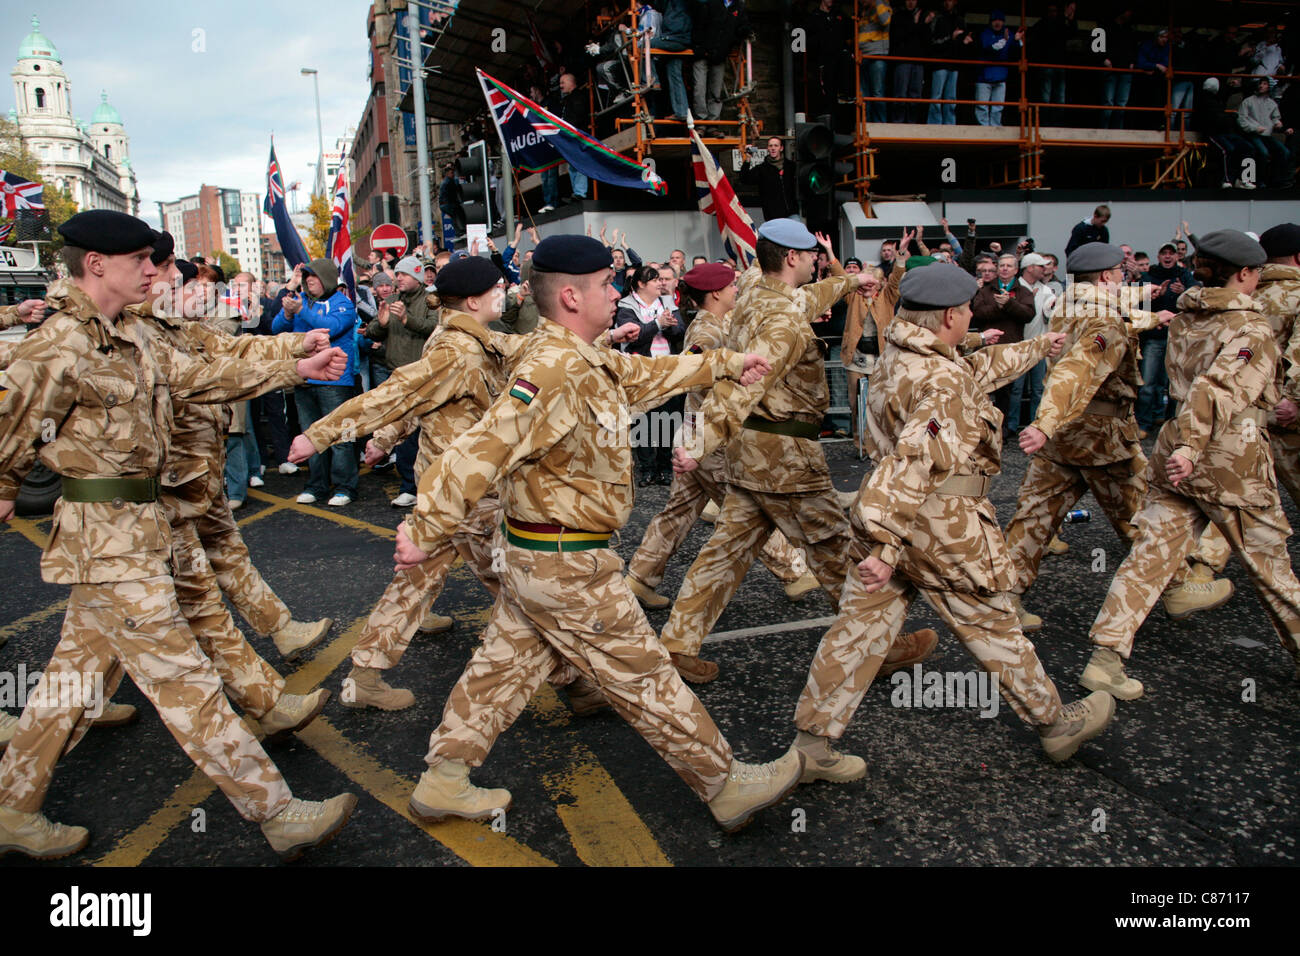 Royal Irish Regiment soldiers walk past loyalist supporters at the Royal Irish Regiment RIR Homecoming Parade in Belfast on September 02, 2008 in Belfast, Northern Ireland. The parade, which passed relatively peacefully, was for troops returning from Iraq and Afghanistan. Stock Photo